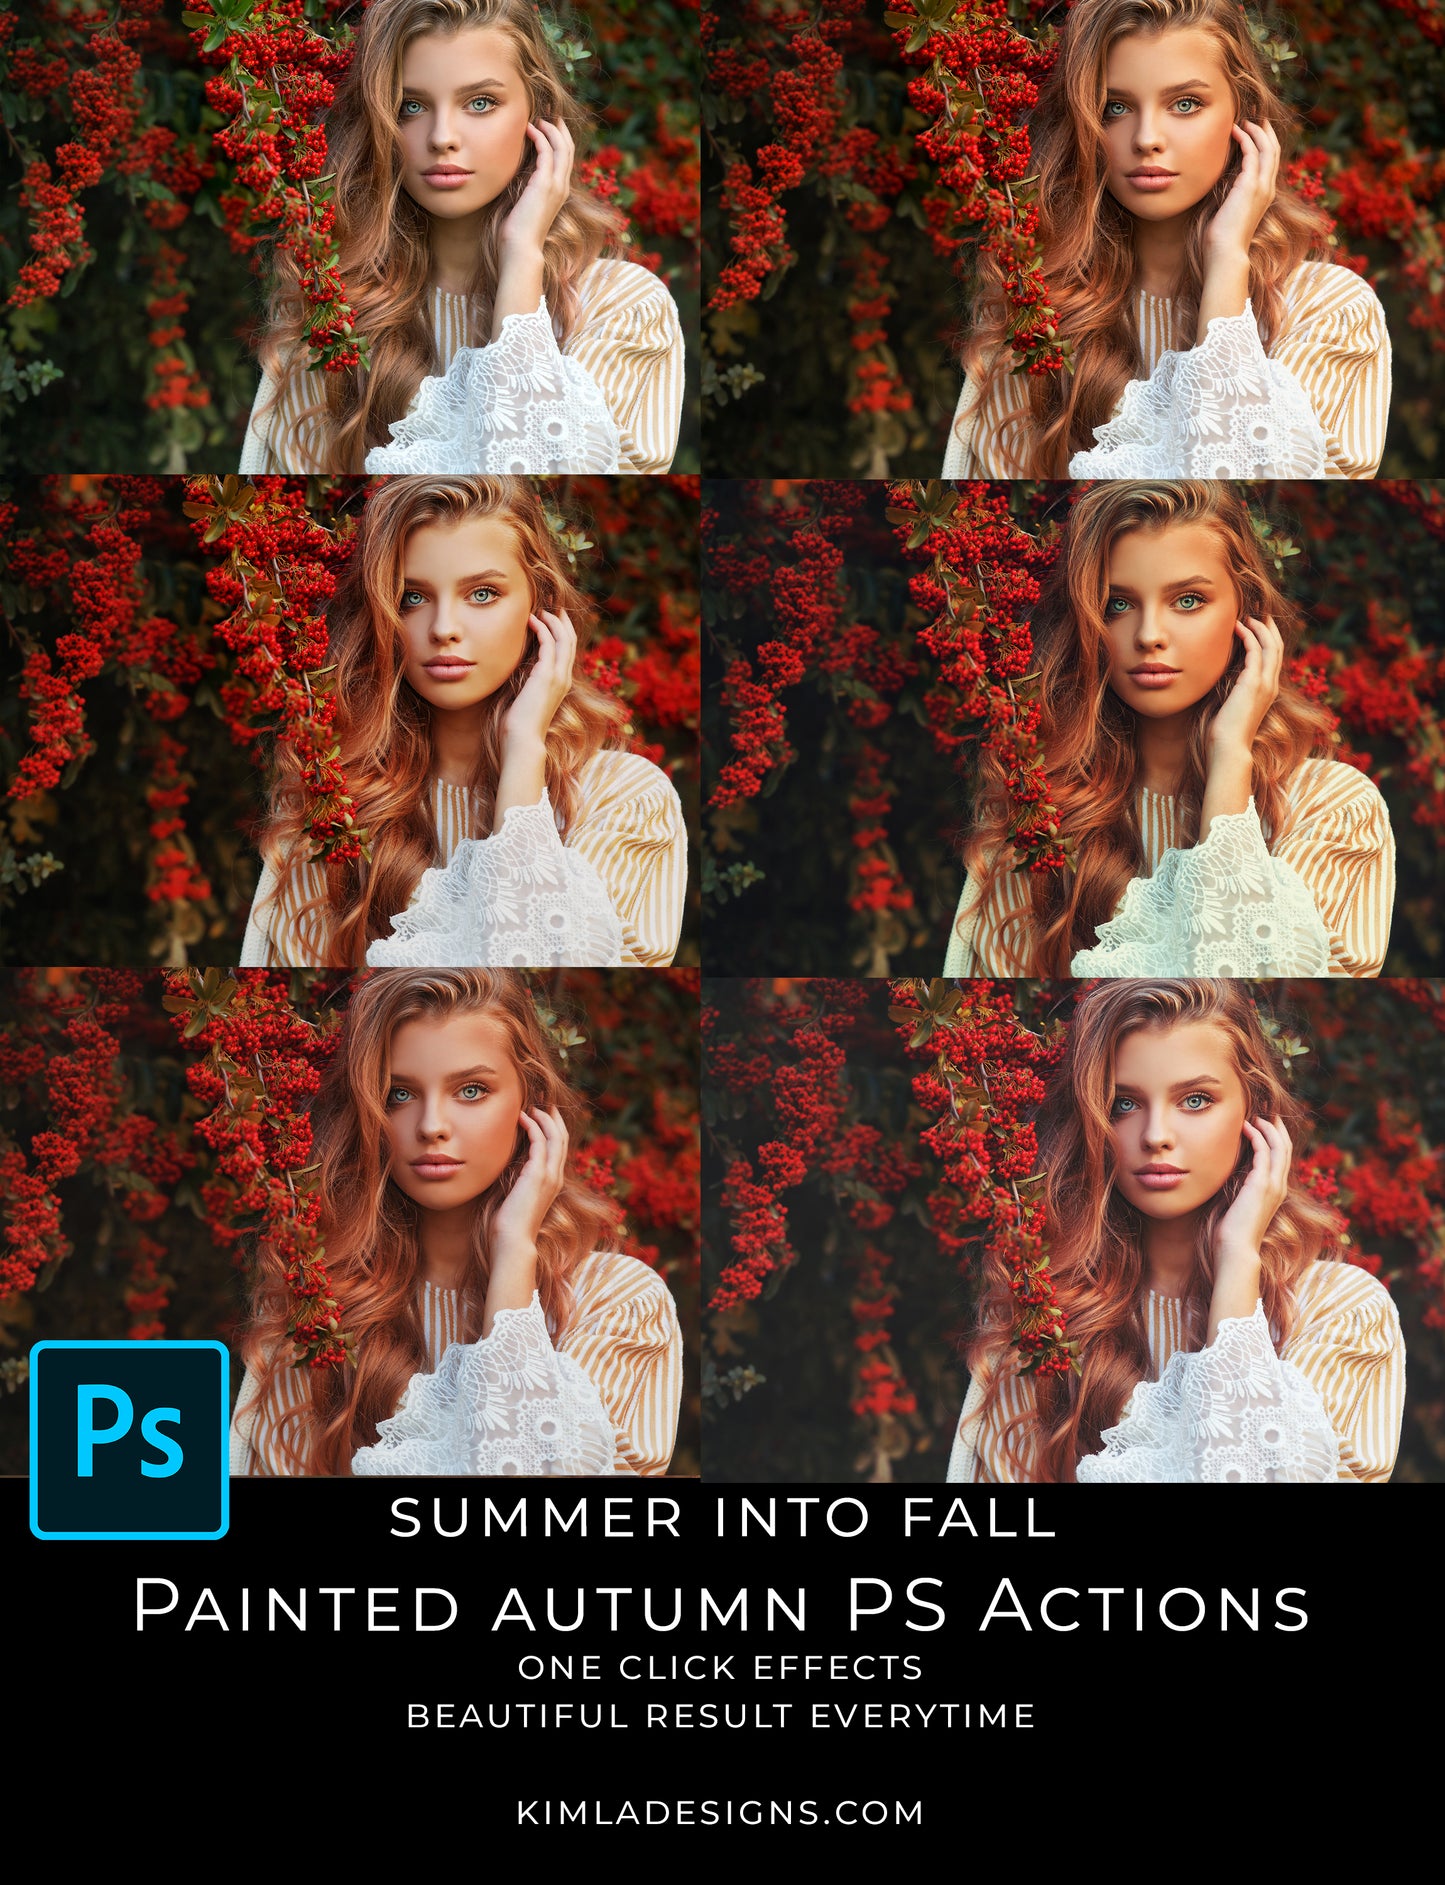 Fall Bundle Offer PS Actions and Fall Overlays